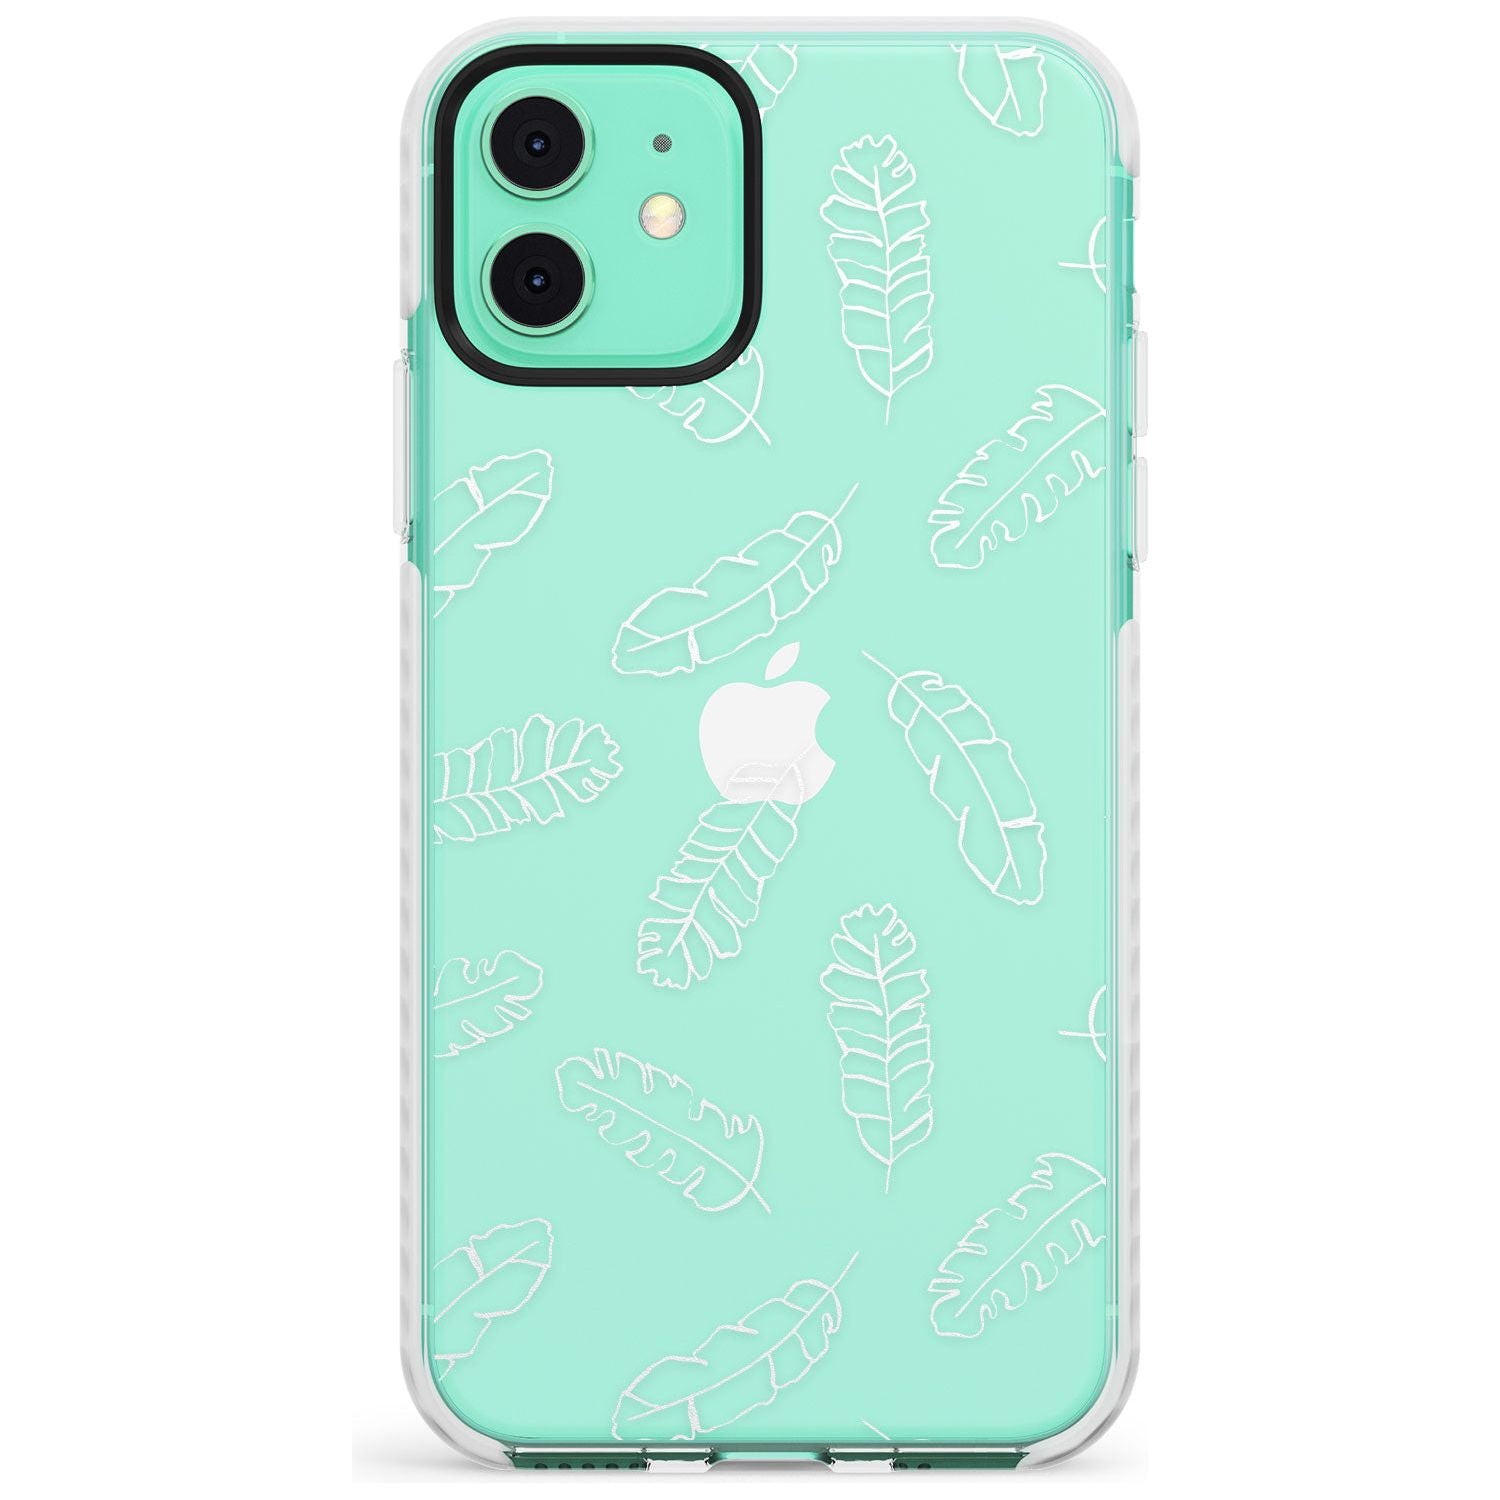 Clear Botanical Designs: Palm Leaves Slim TPU Phone Case for iPhone 11